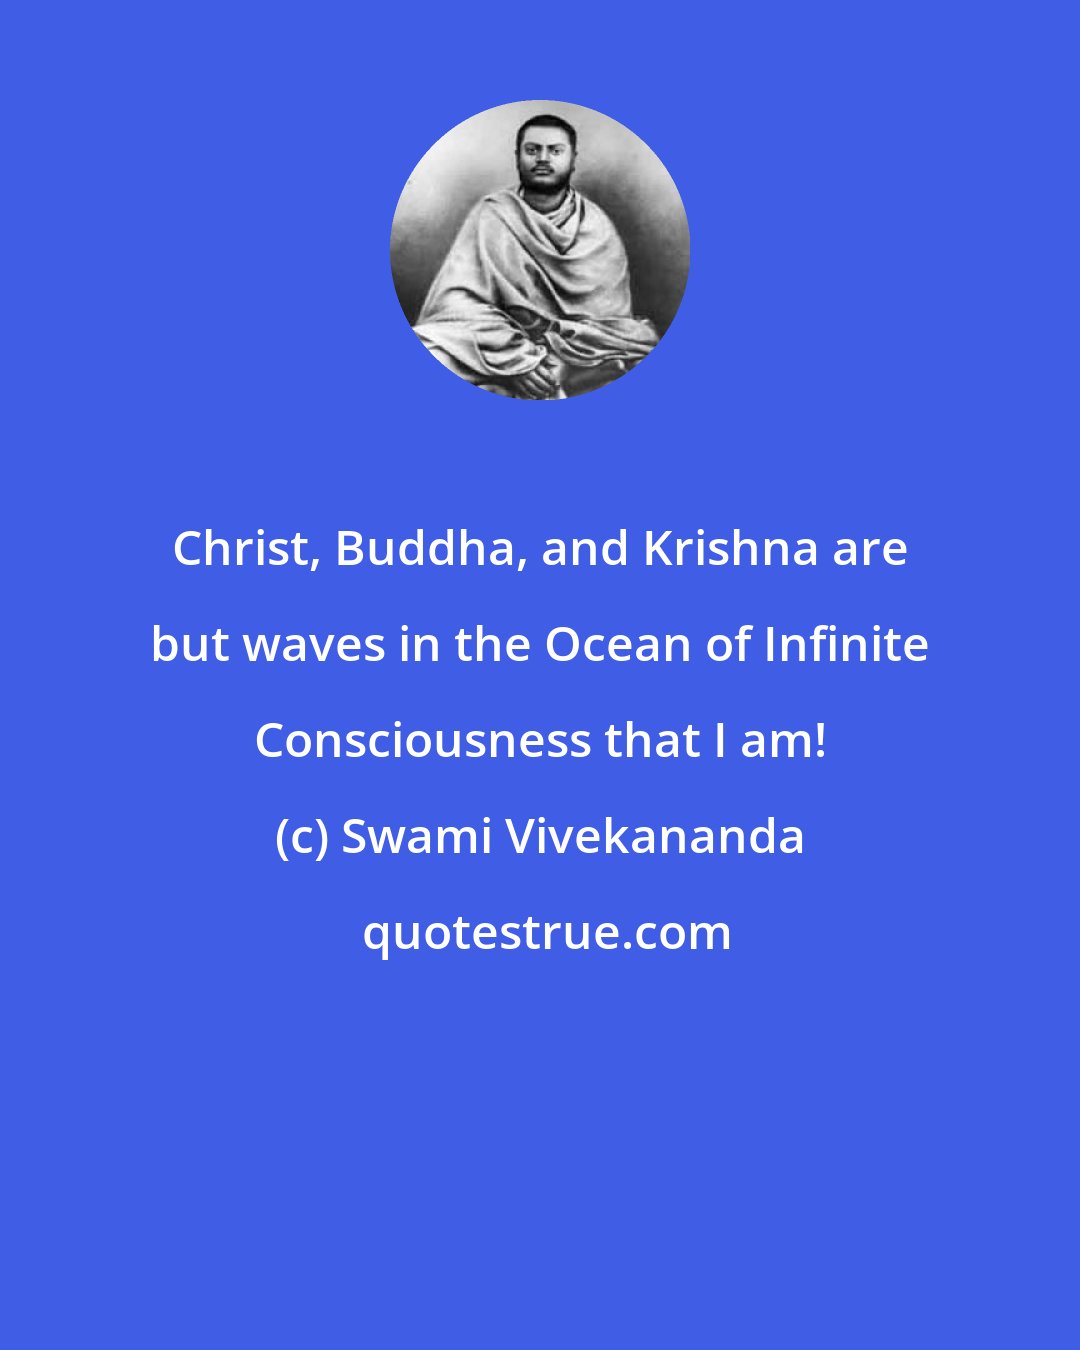 Swami Vivekananda: Christ, Buddha, and Krishna are but waves in the Ocean of Infinite Consciousness that I am!